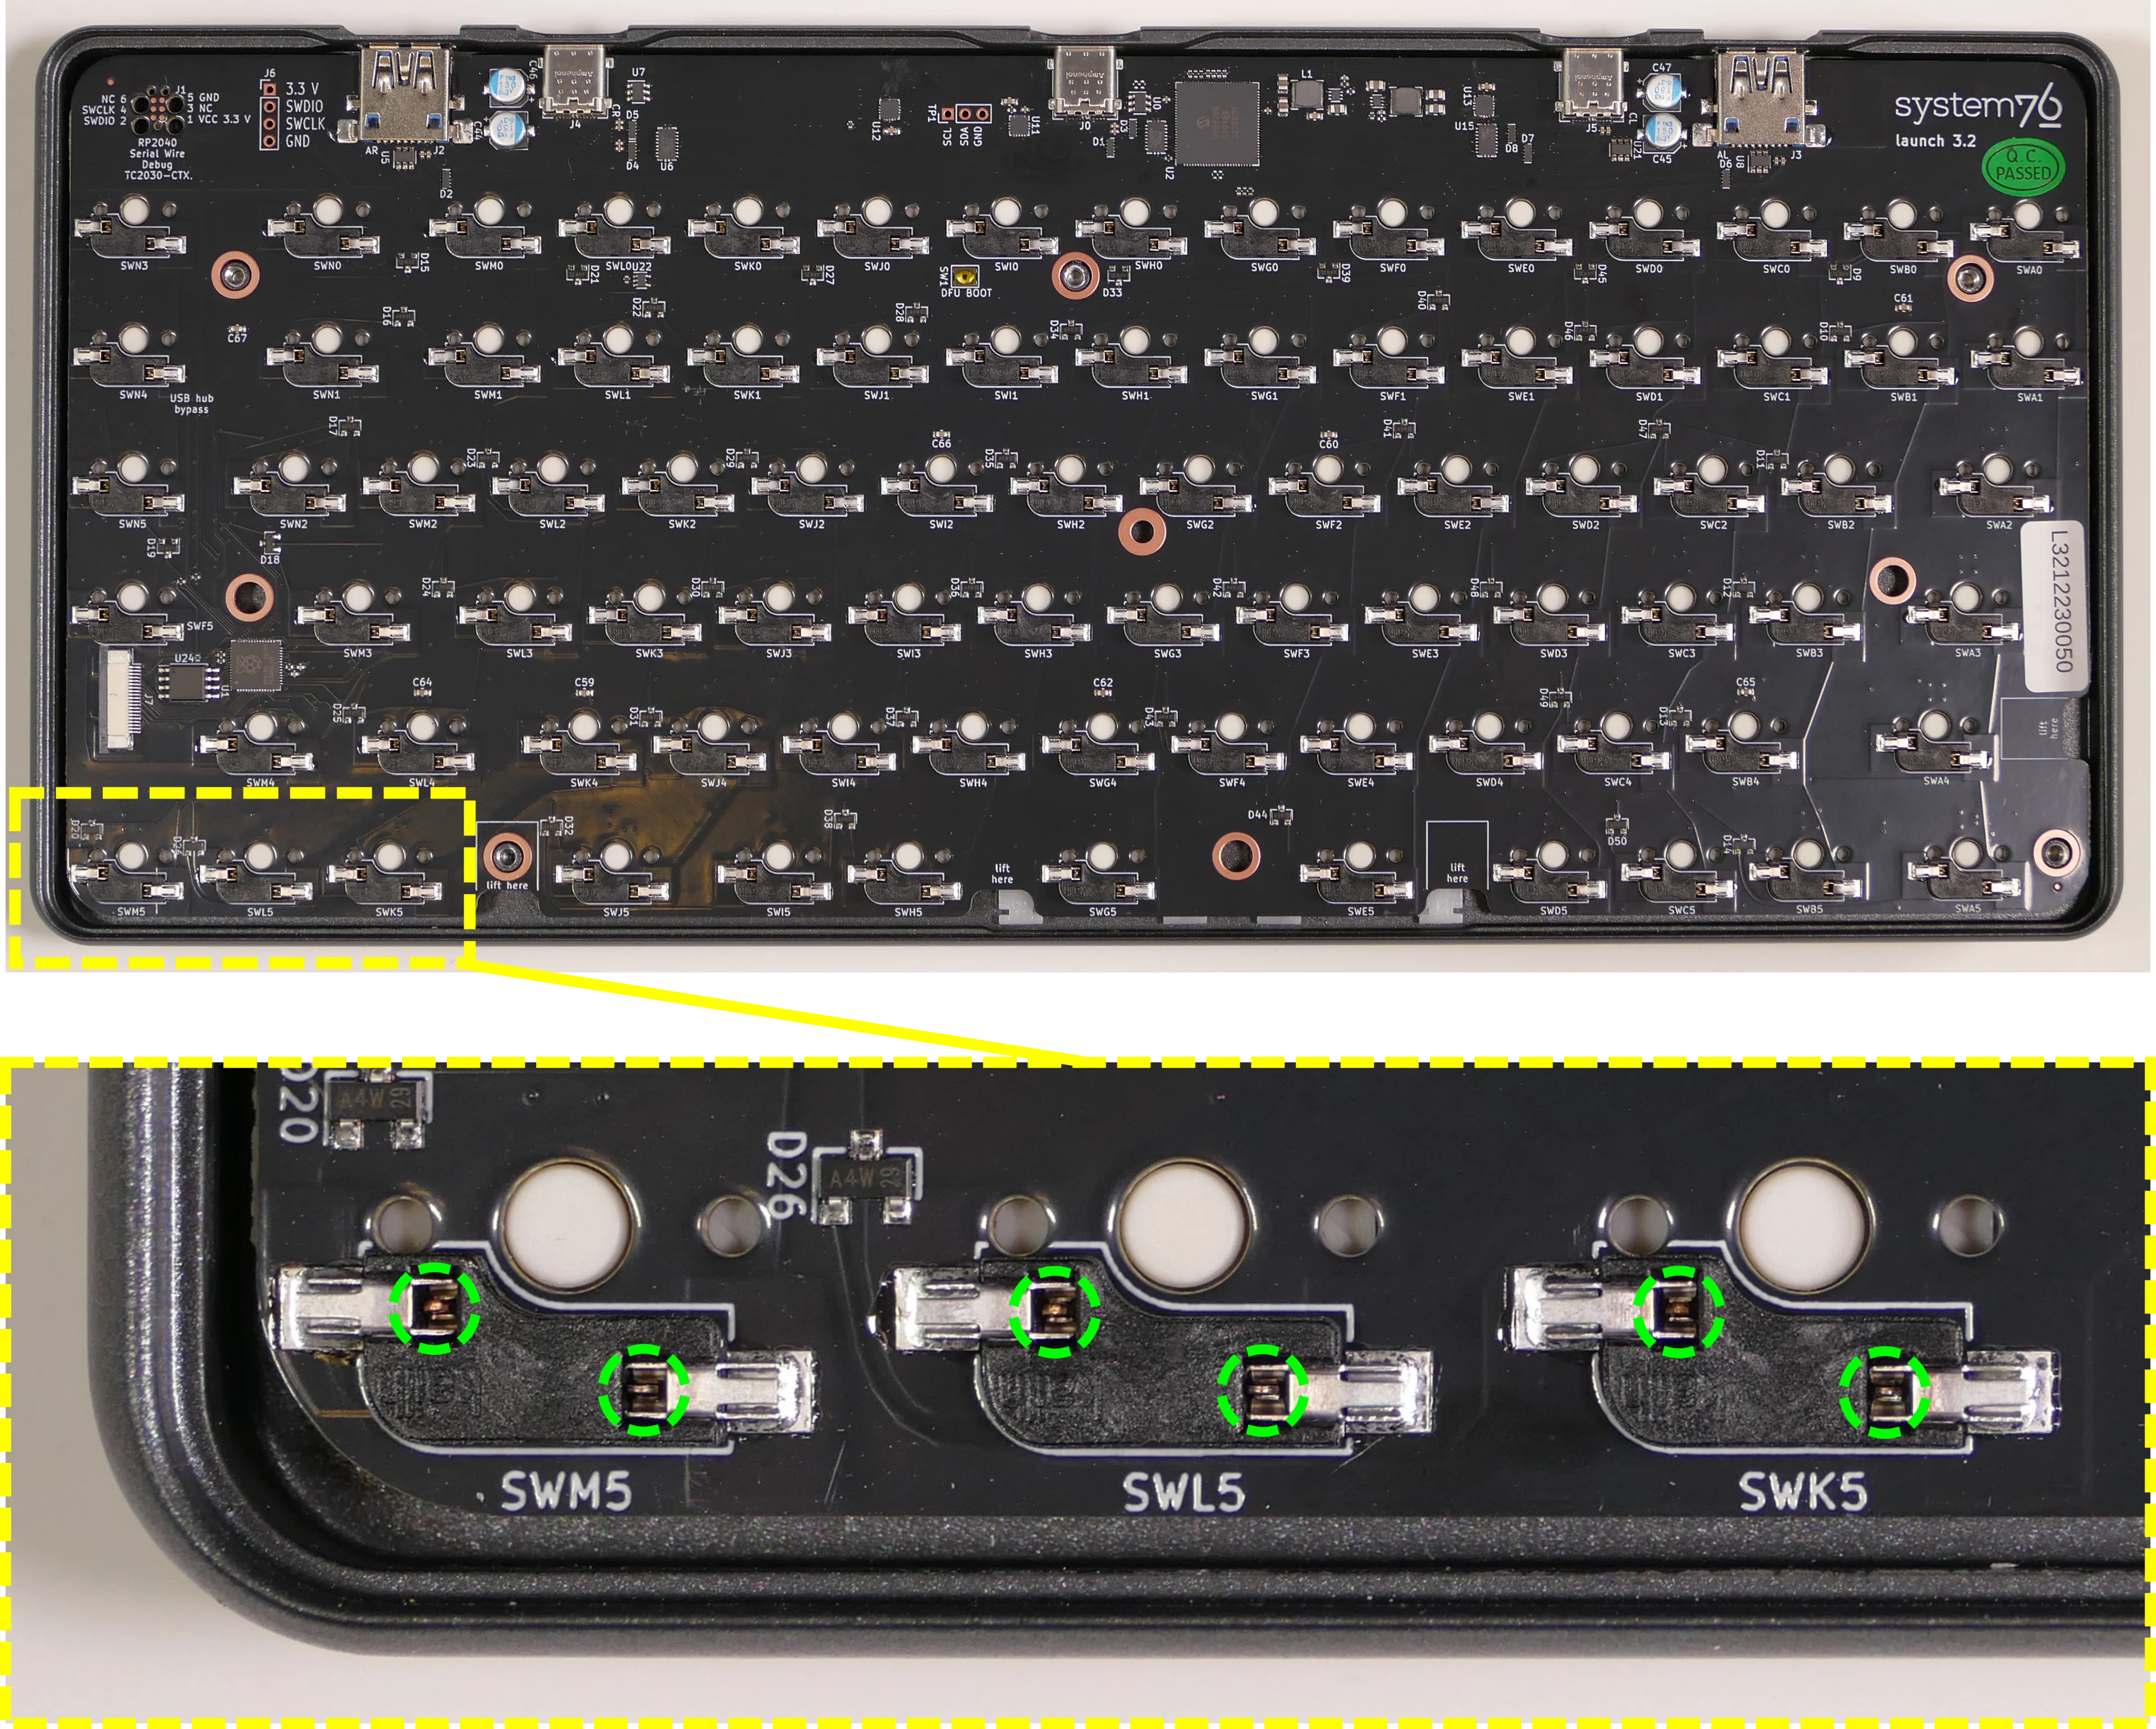 Switch pins visible through sockets